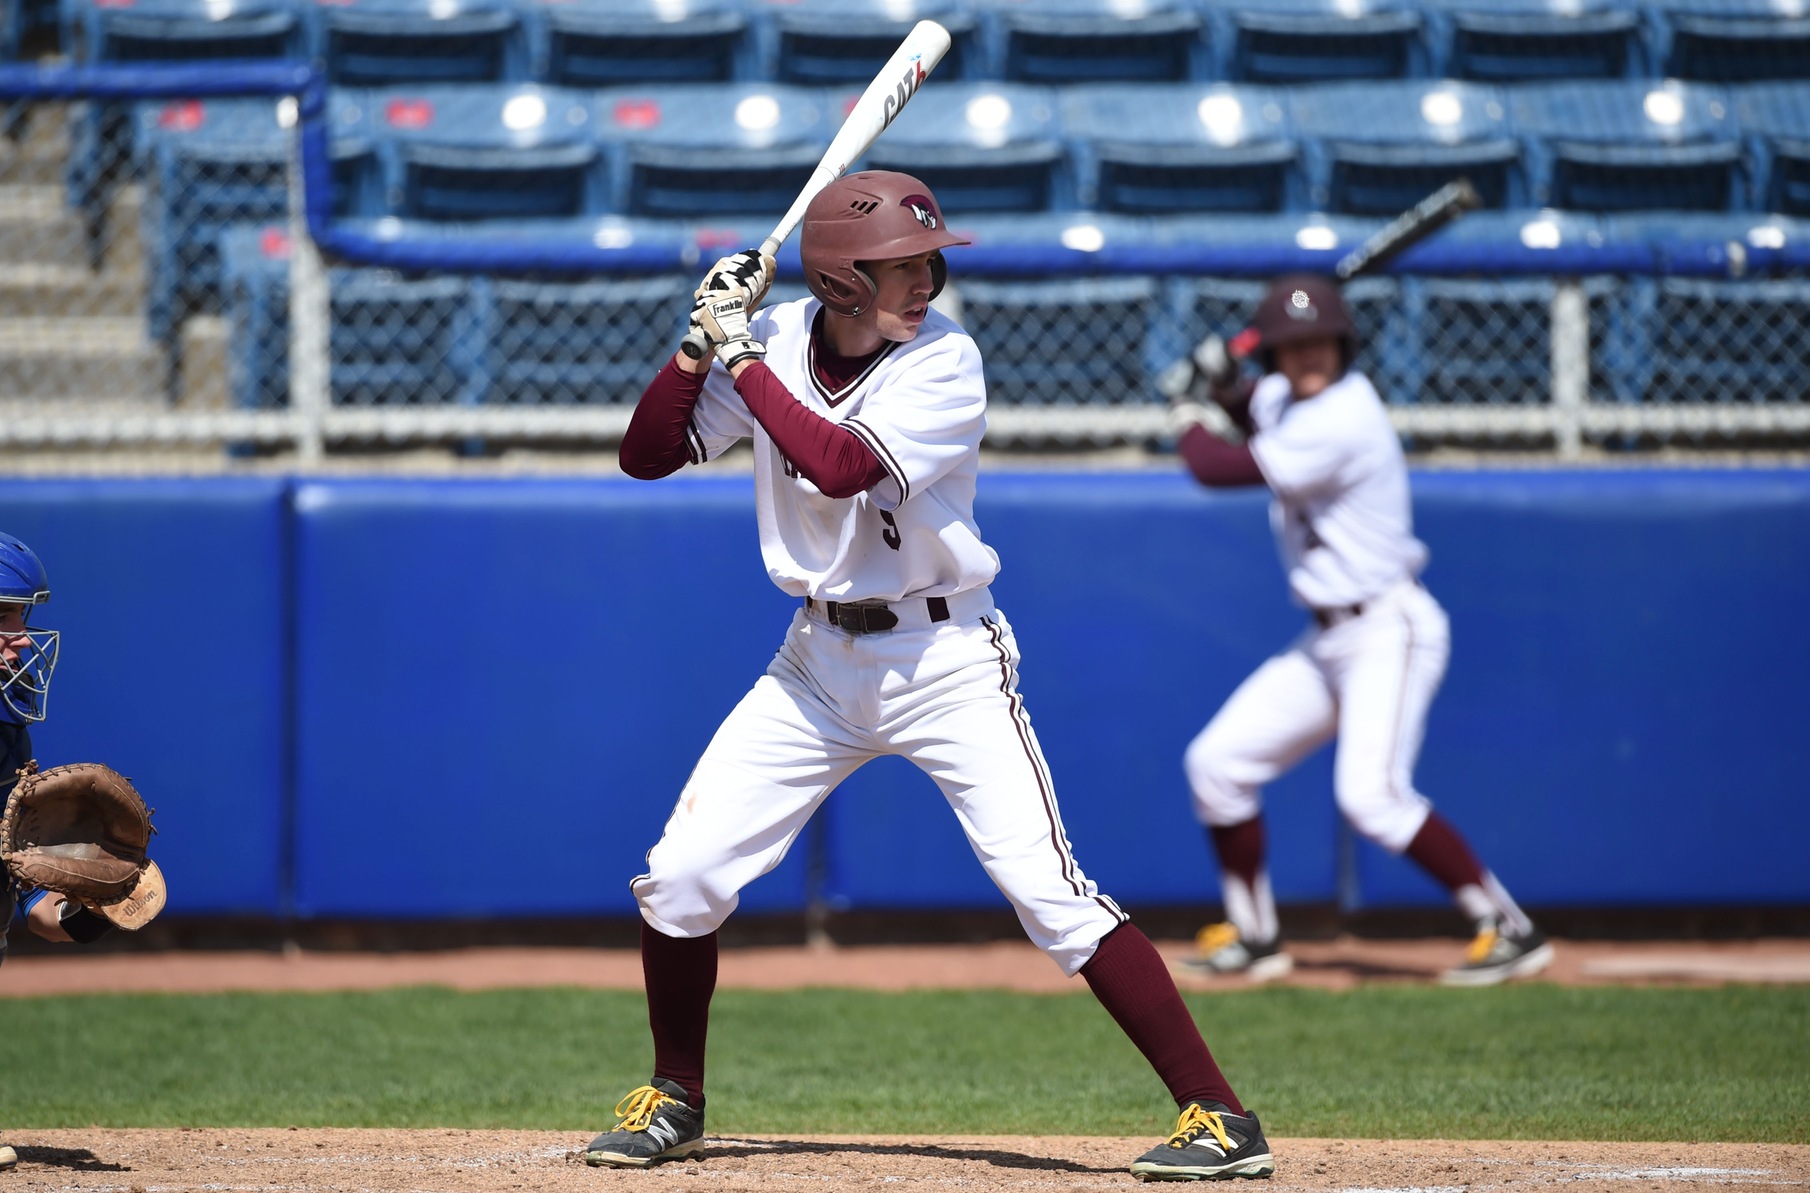 Baseball Splits with W&L; Ties School Record for Wins